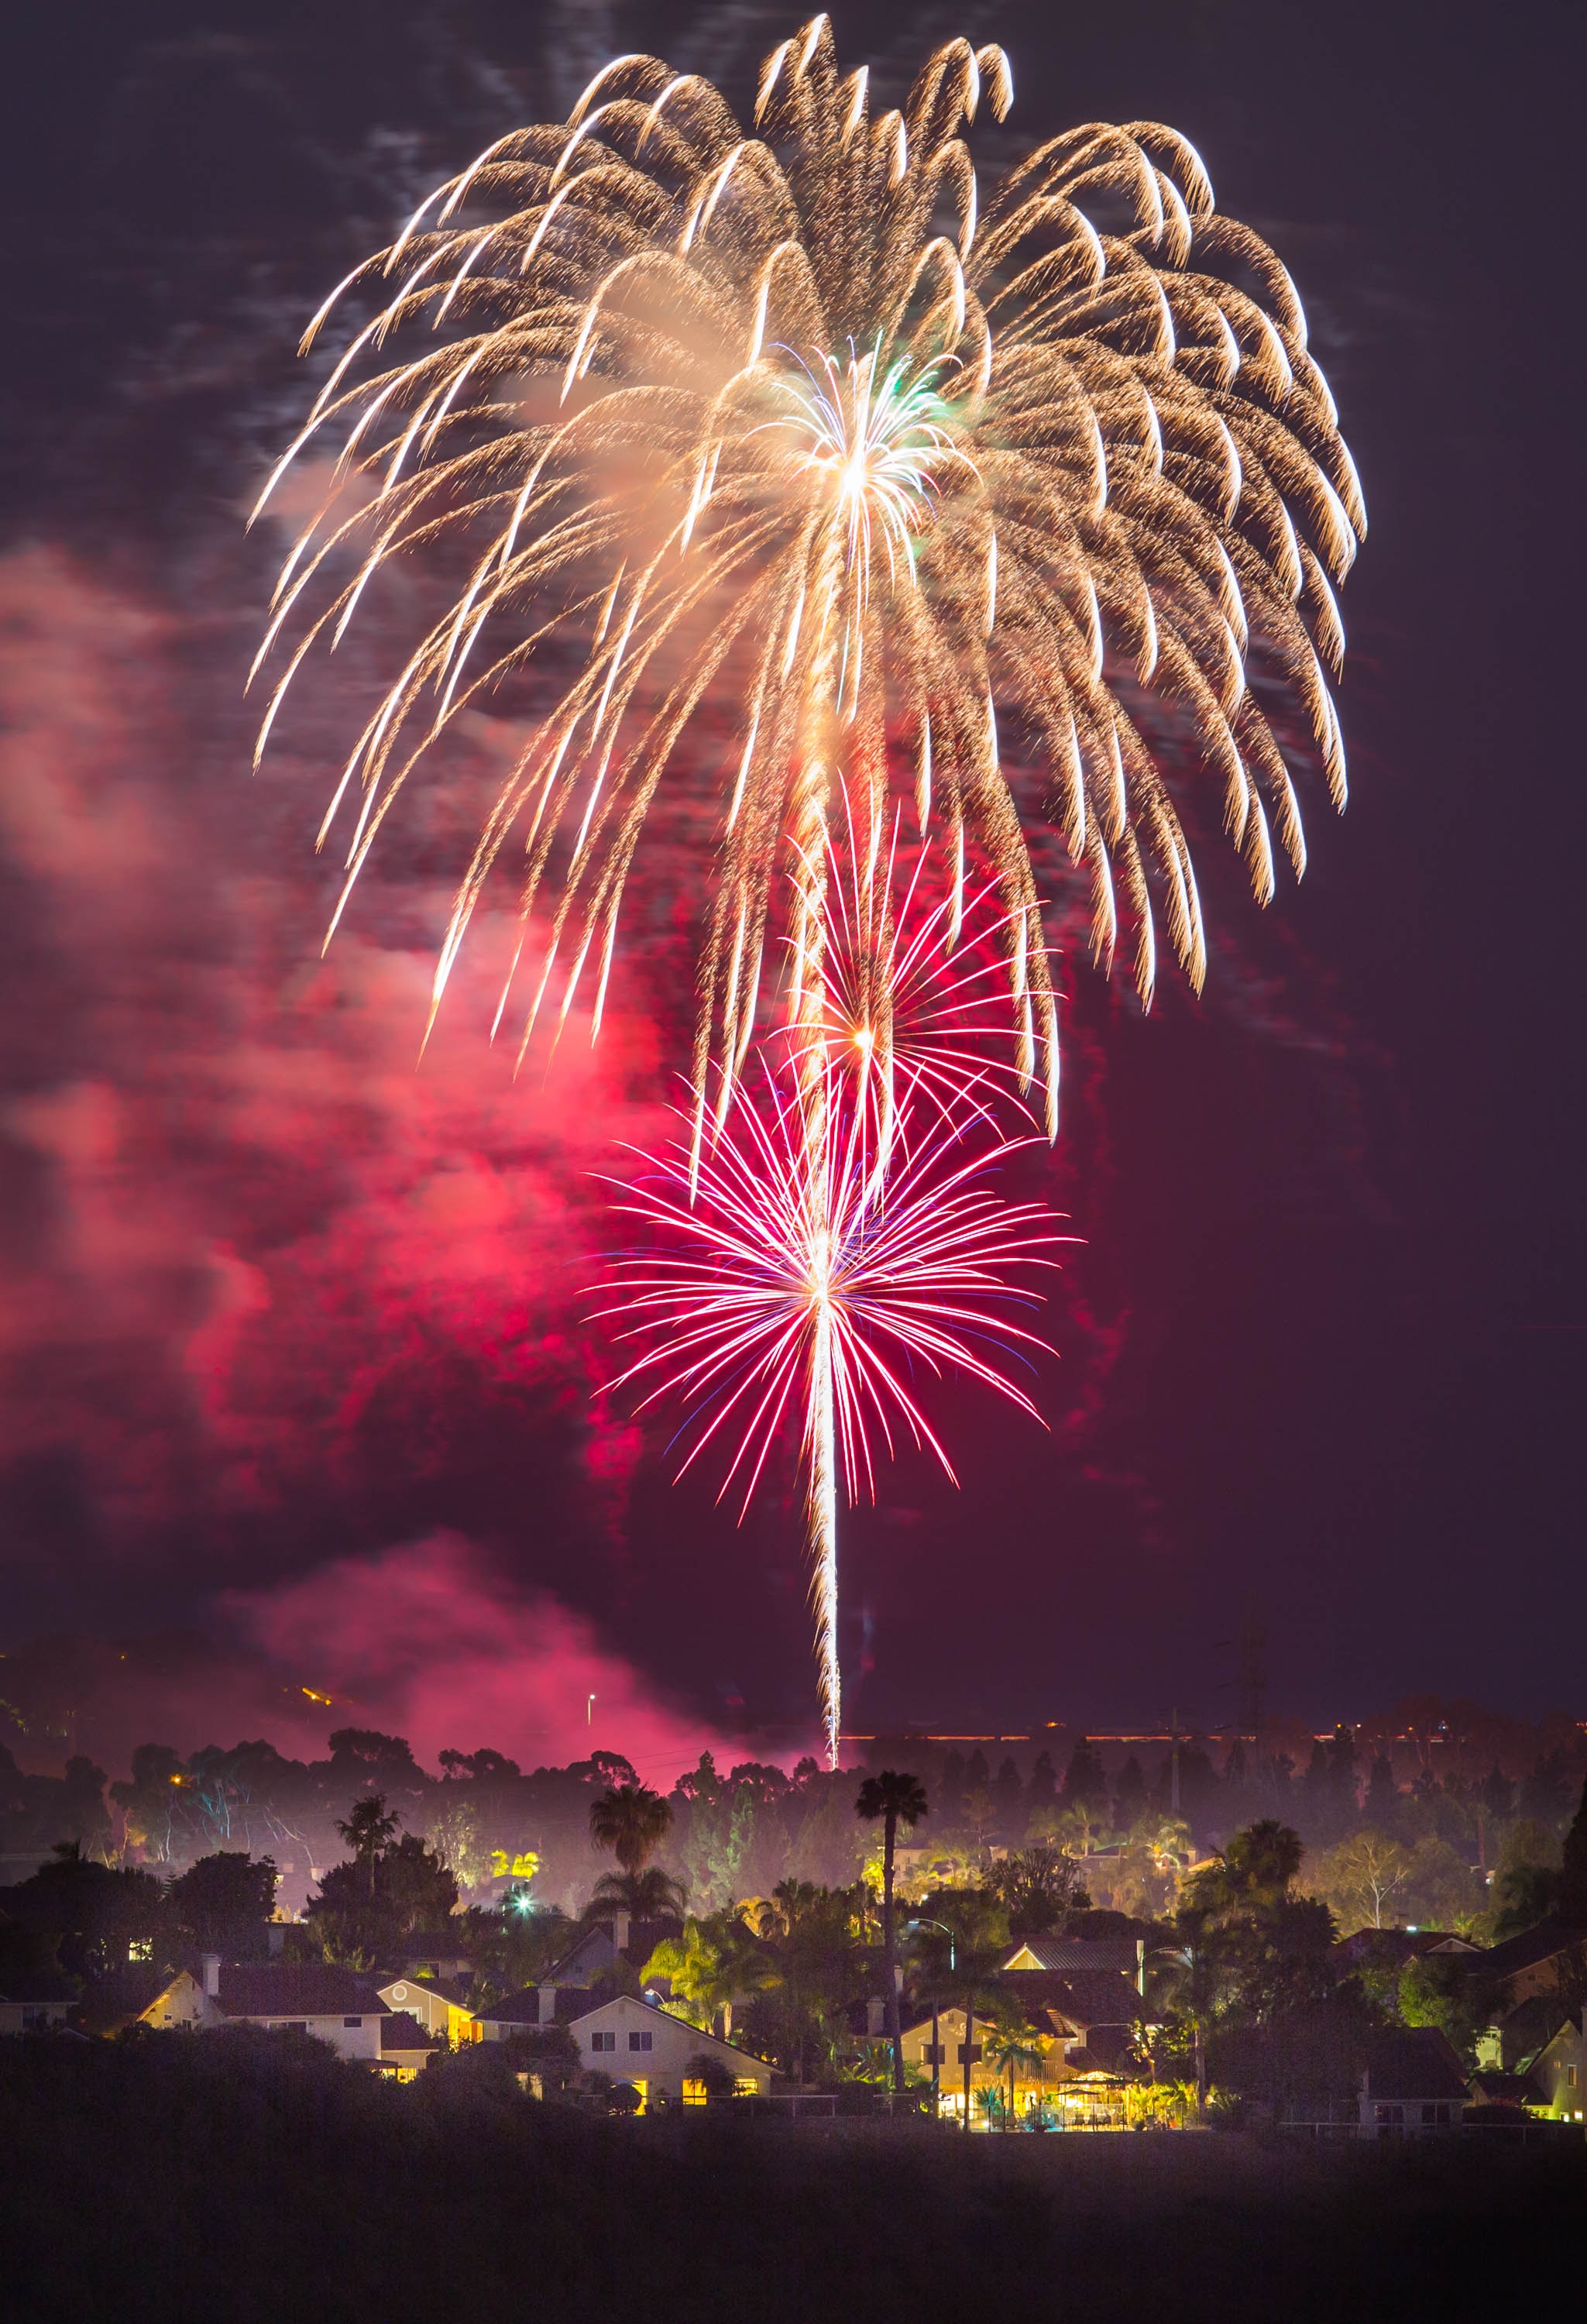 Phone Wallpaper (No watermarks) united states, holidays, building, fireworks